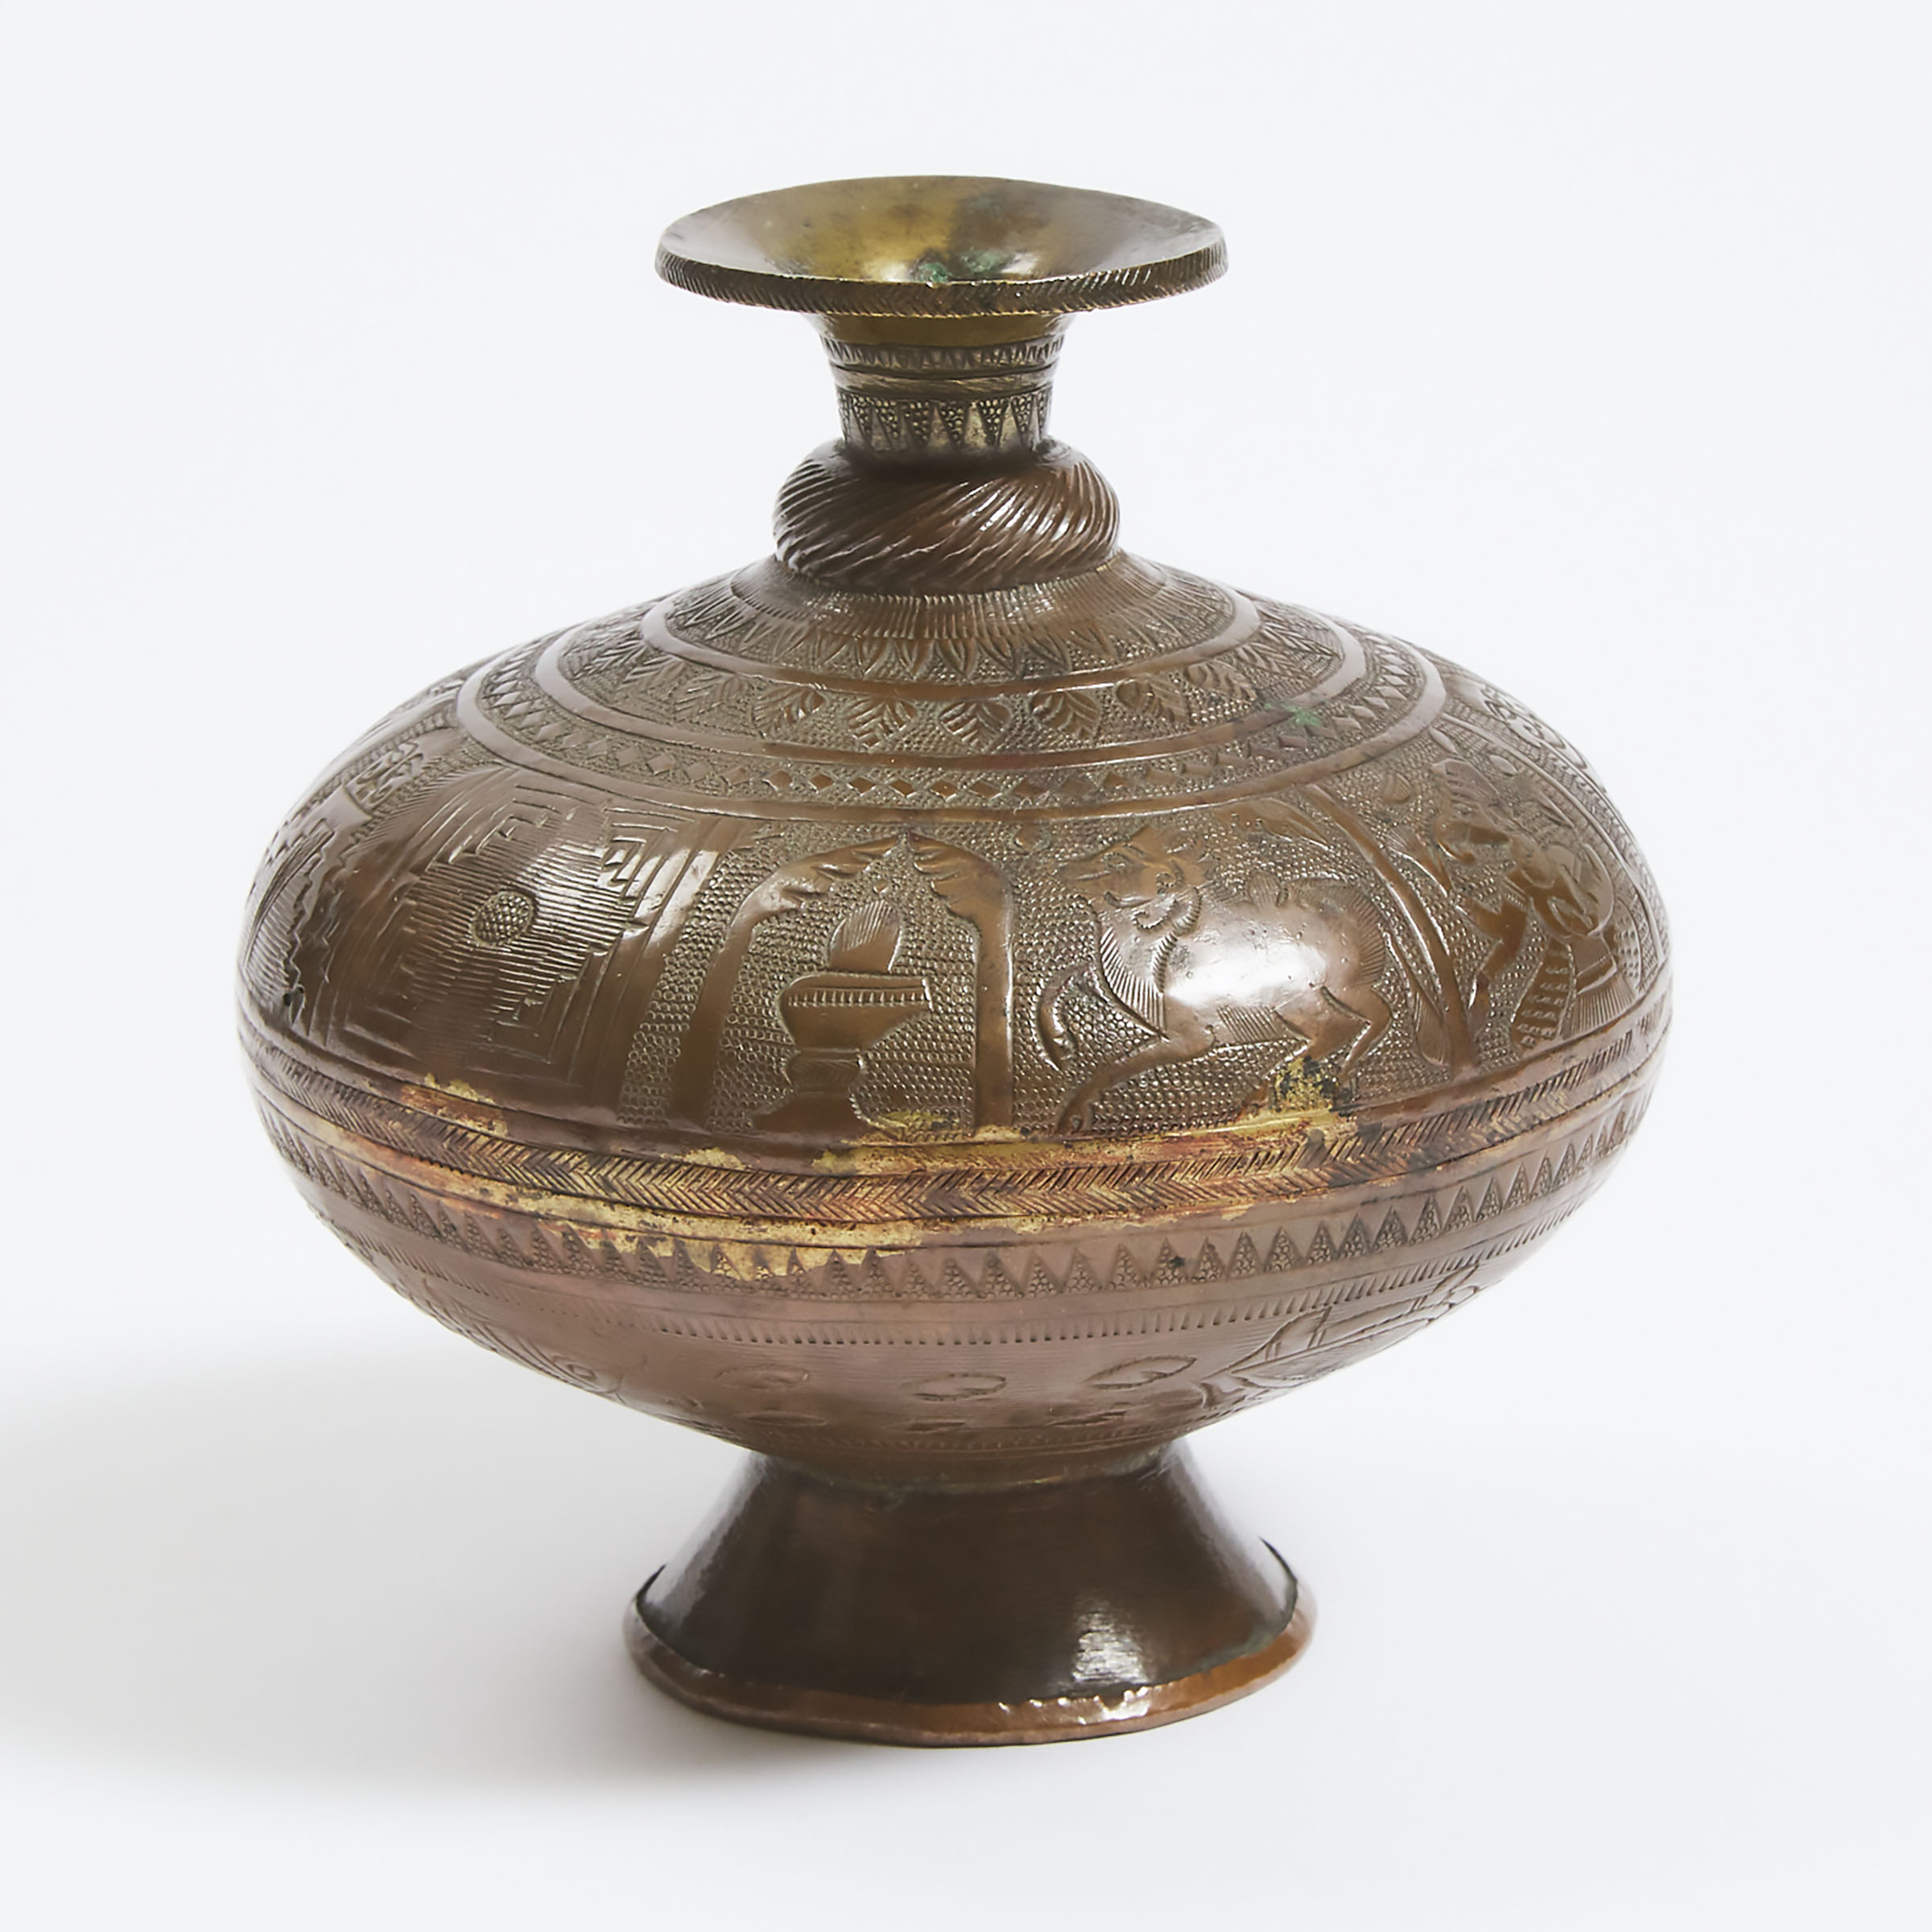 A Mughal Brass Vase (Lota) with